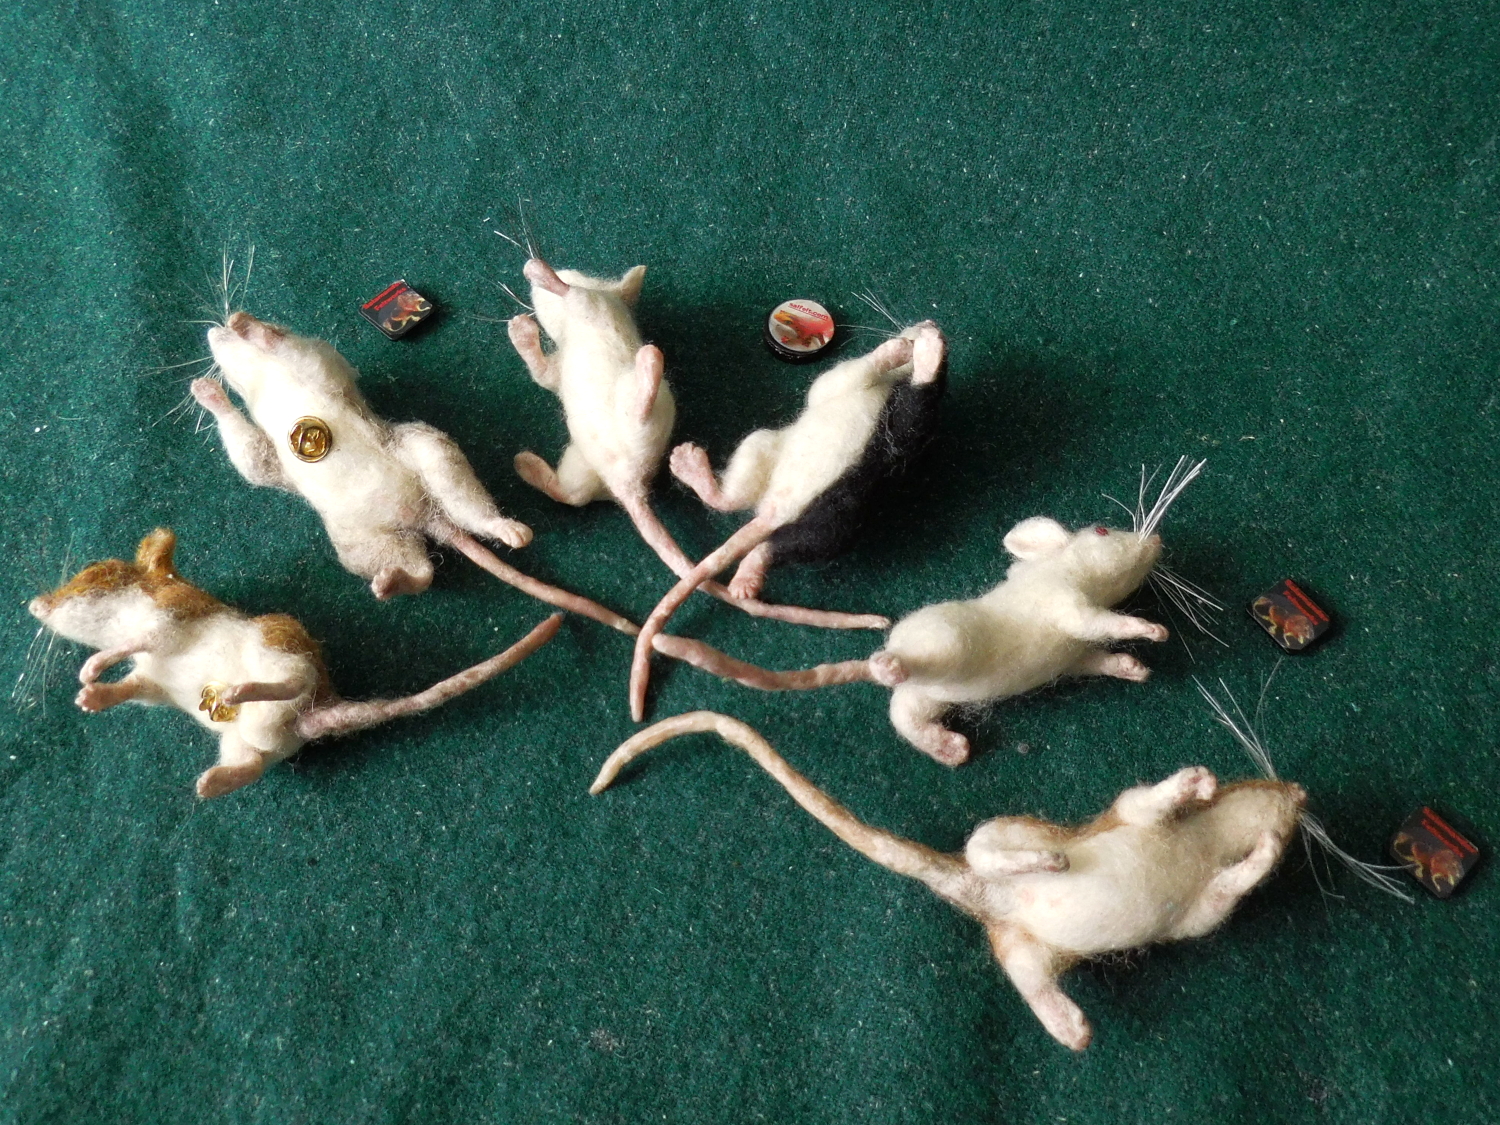 Mouse Litter 25 – Back from the Edge